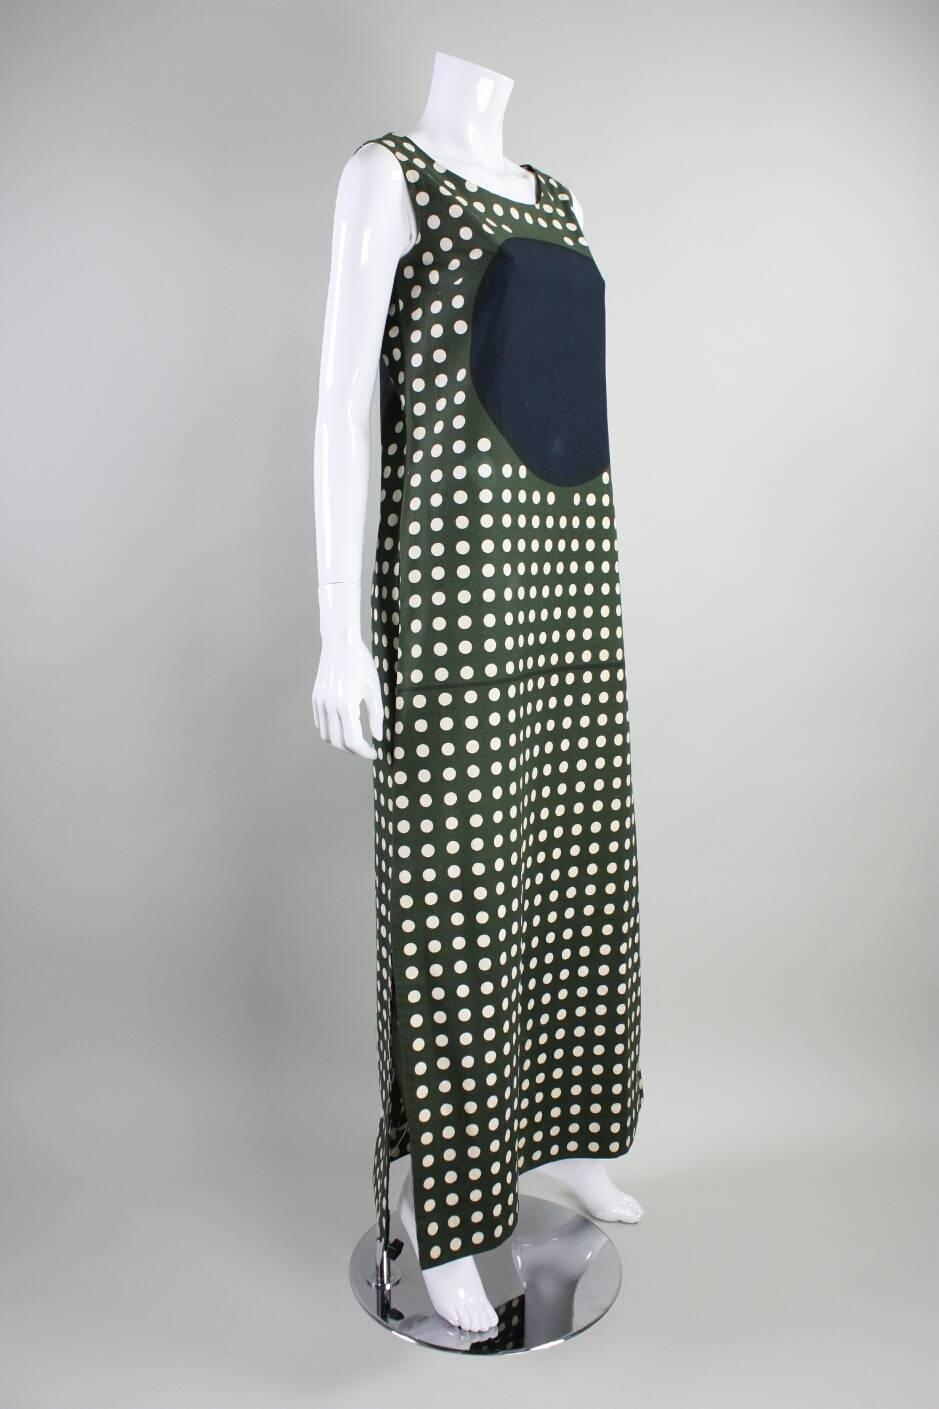 Vintage maxi dress from Marimekko dates to the 1960's and is made of olive green cotton with a white dot print.  Scoop neck.  Sleeveless.  Unlined.  No closures.  Hip pockets.  

Labeled a vintage size Medium.

Measurements-

Bust: 36"
Waist: